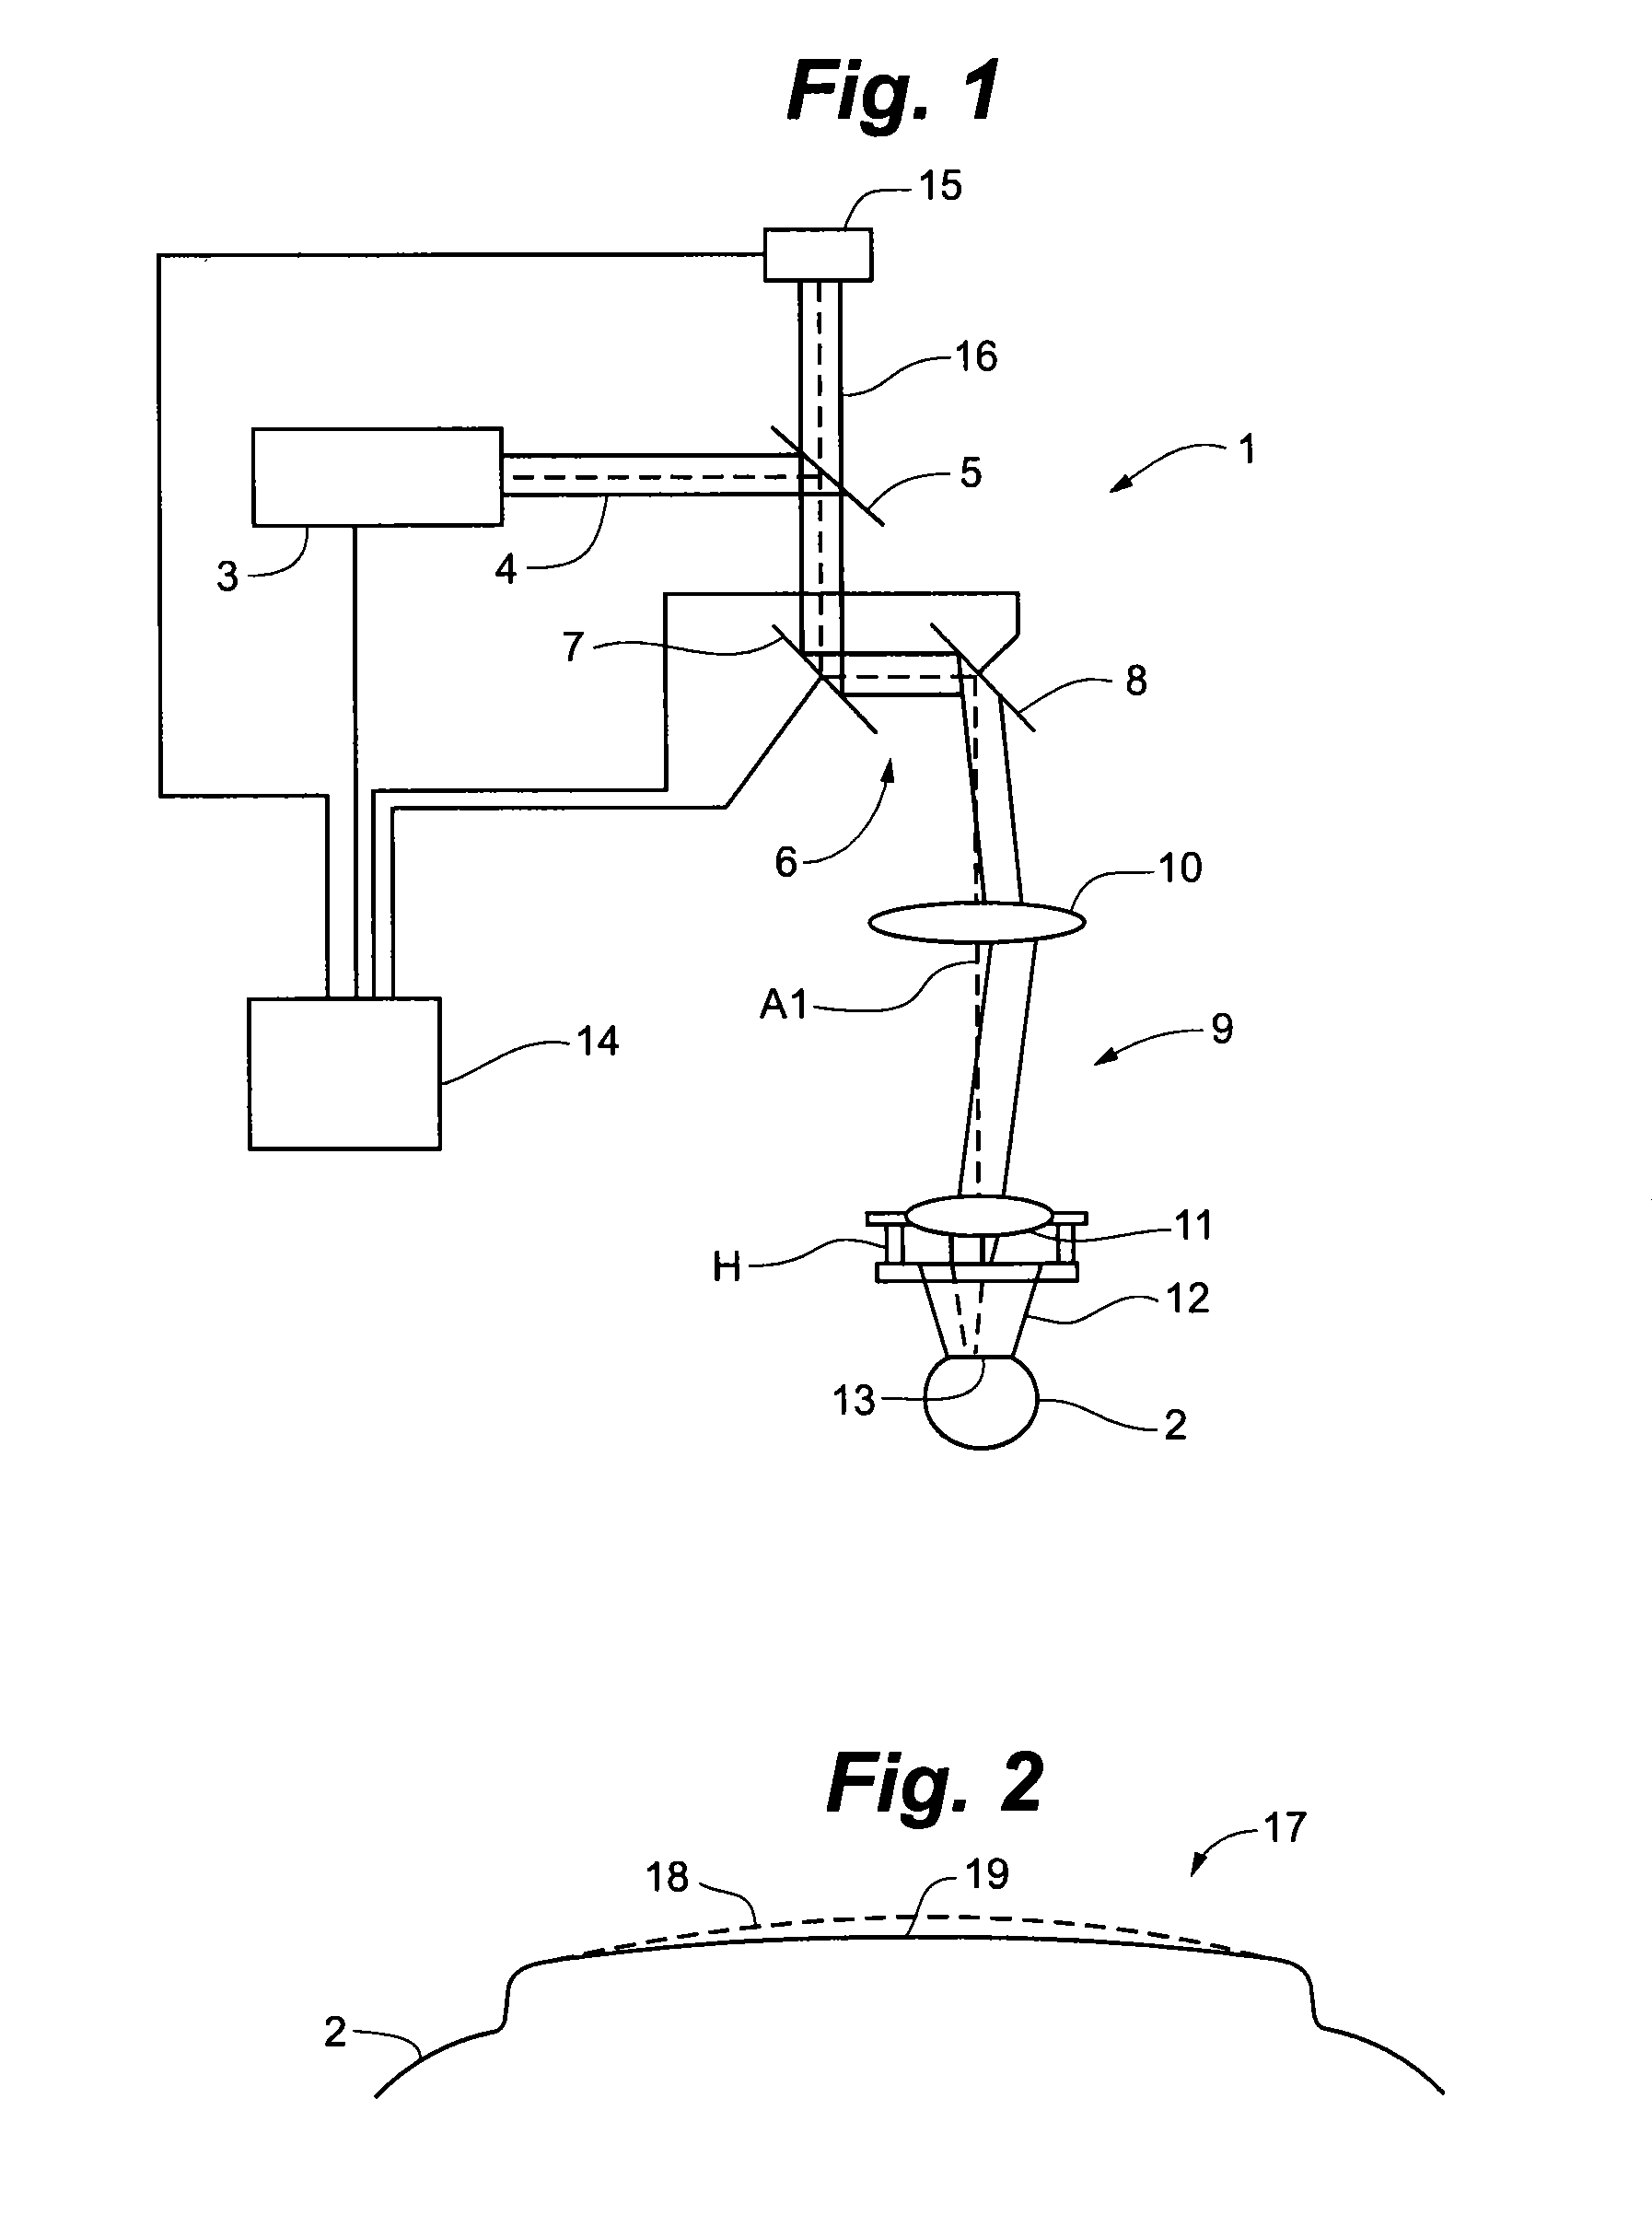 Adapter for coupling a laser processing device to an object